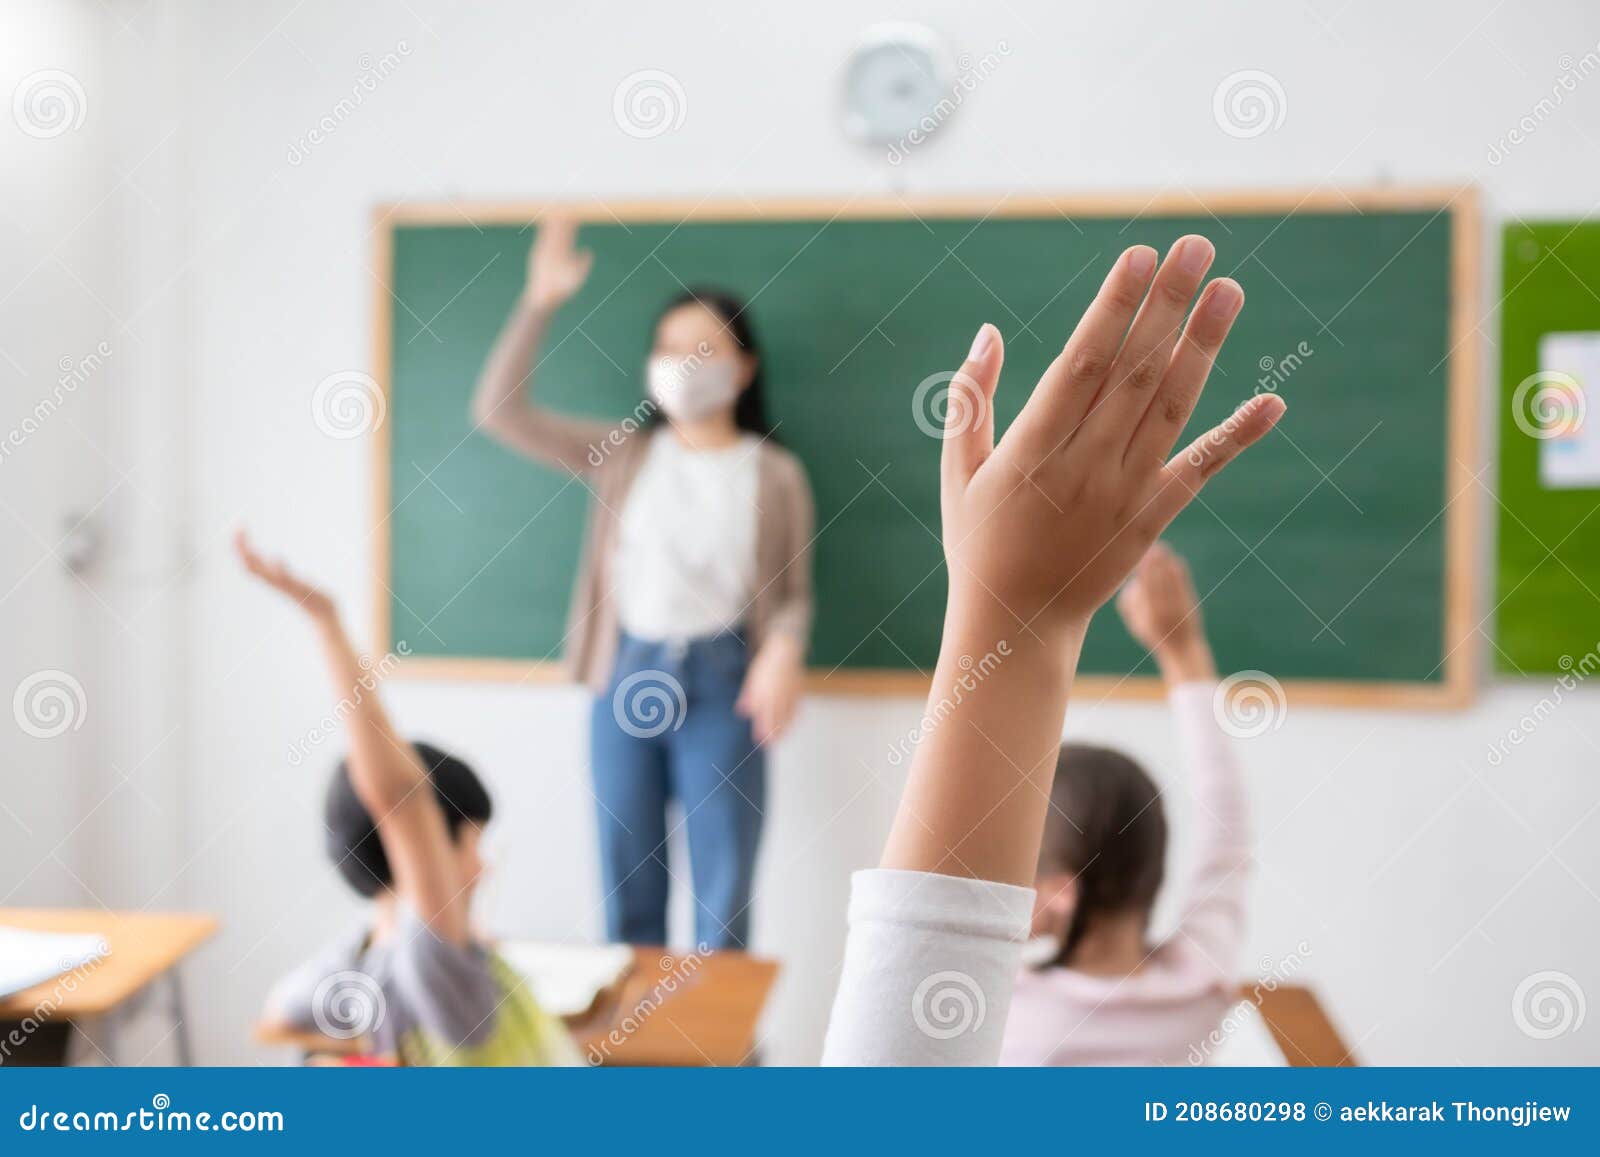 selective focus on hand. children or schoolkids or students raising hands up with asian teacher wearing protective face mask in